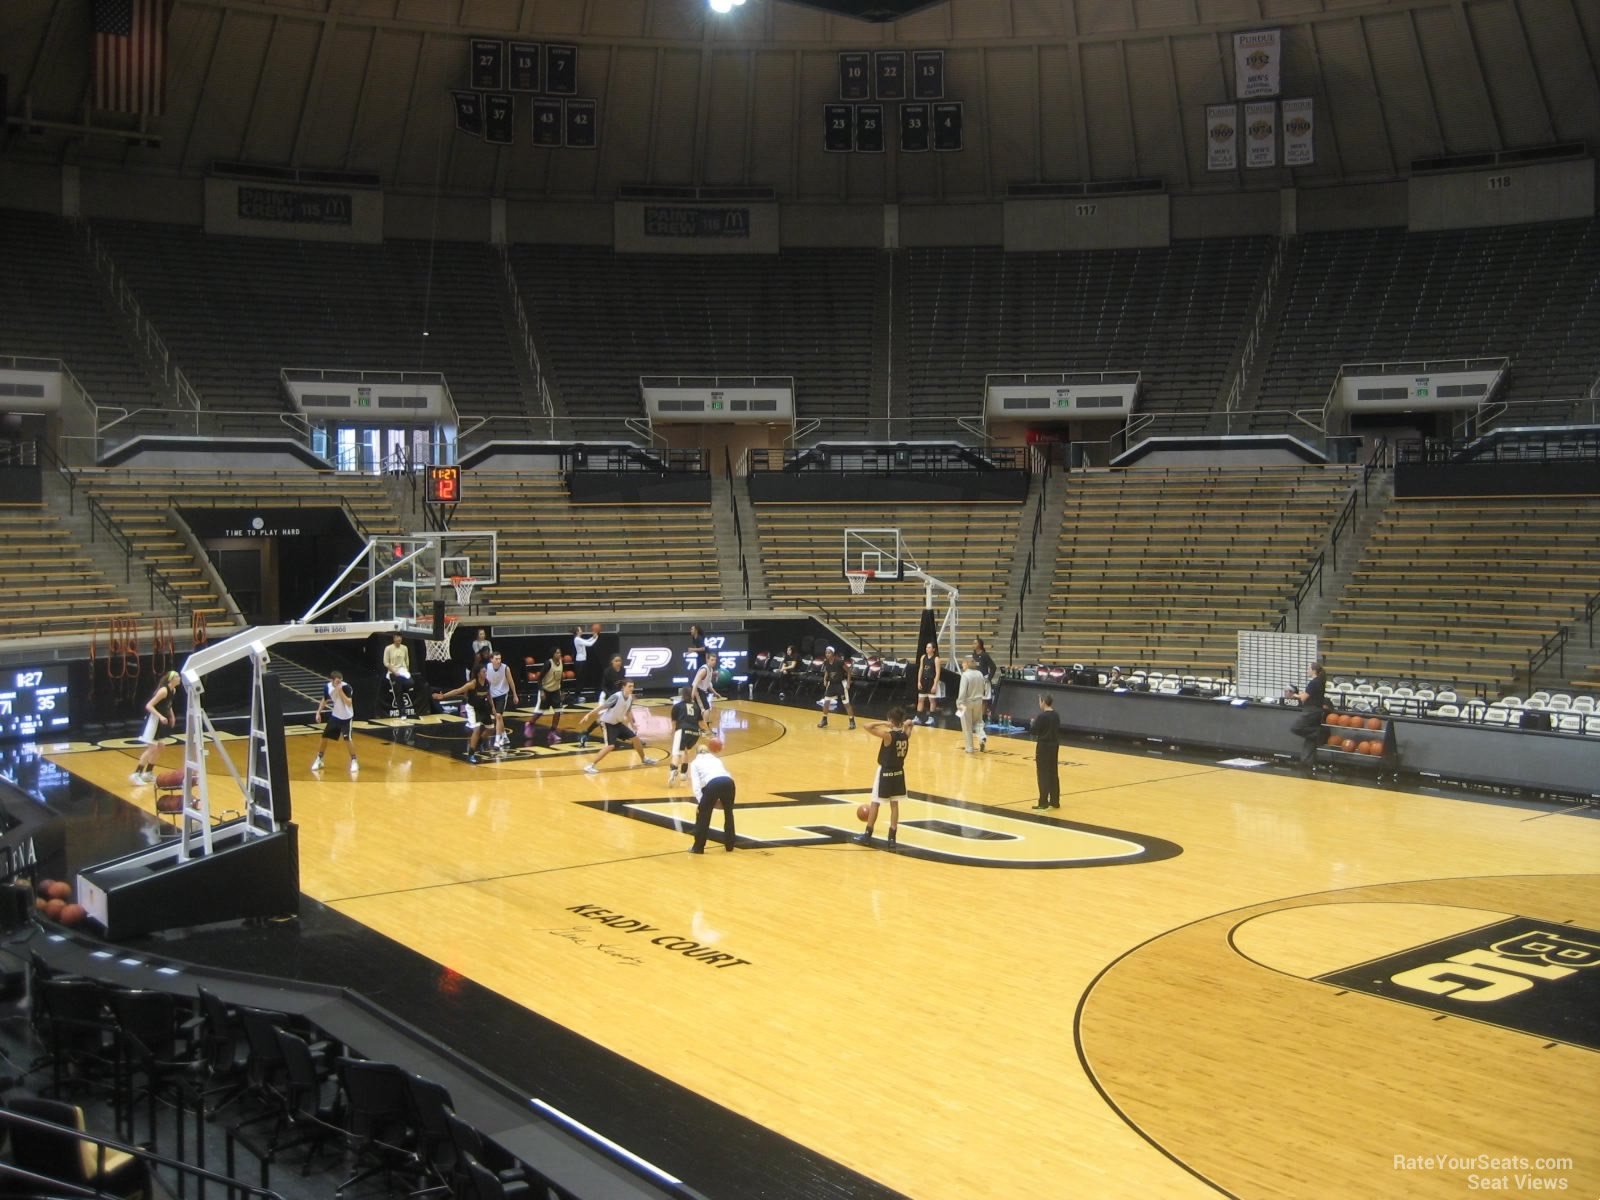 section 7, row 10 seat view  - mackey arena